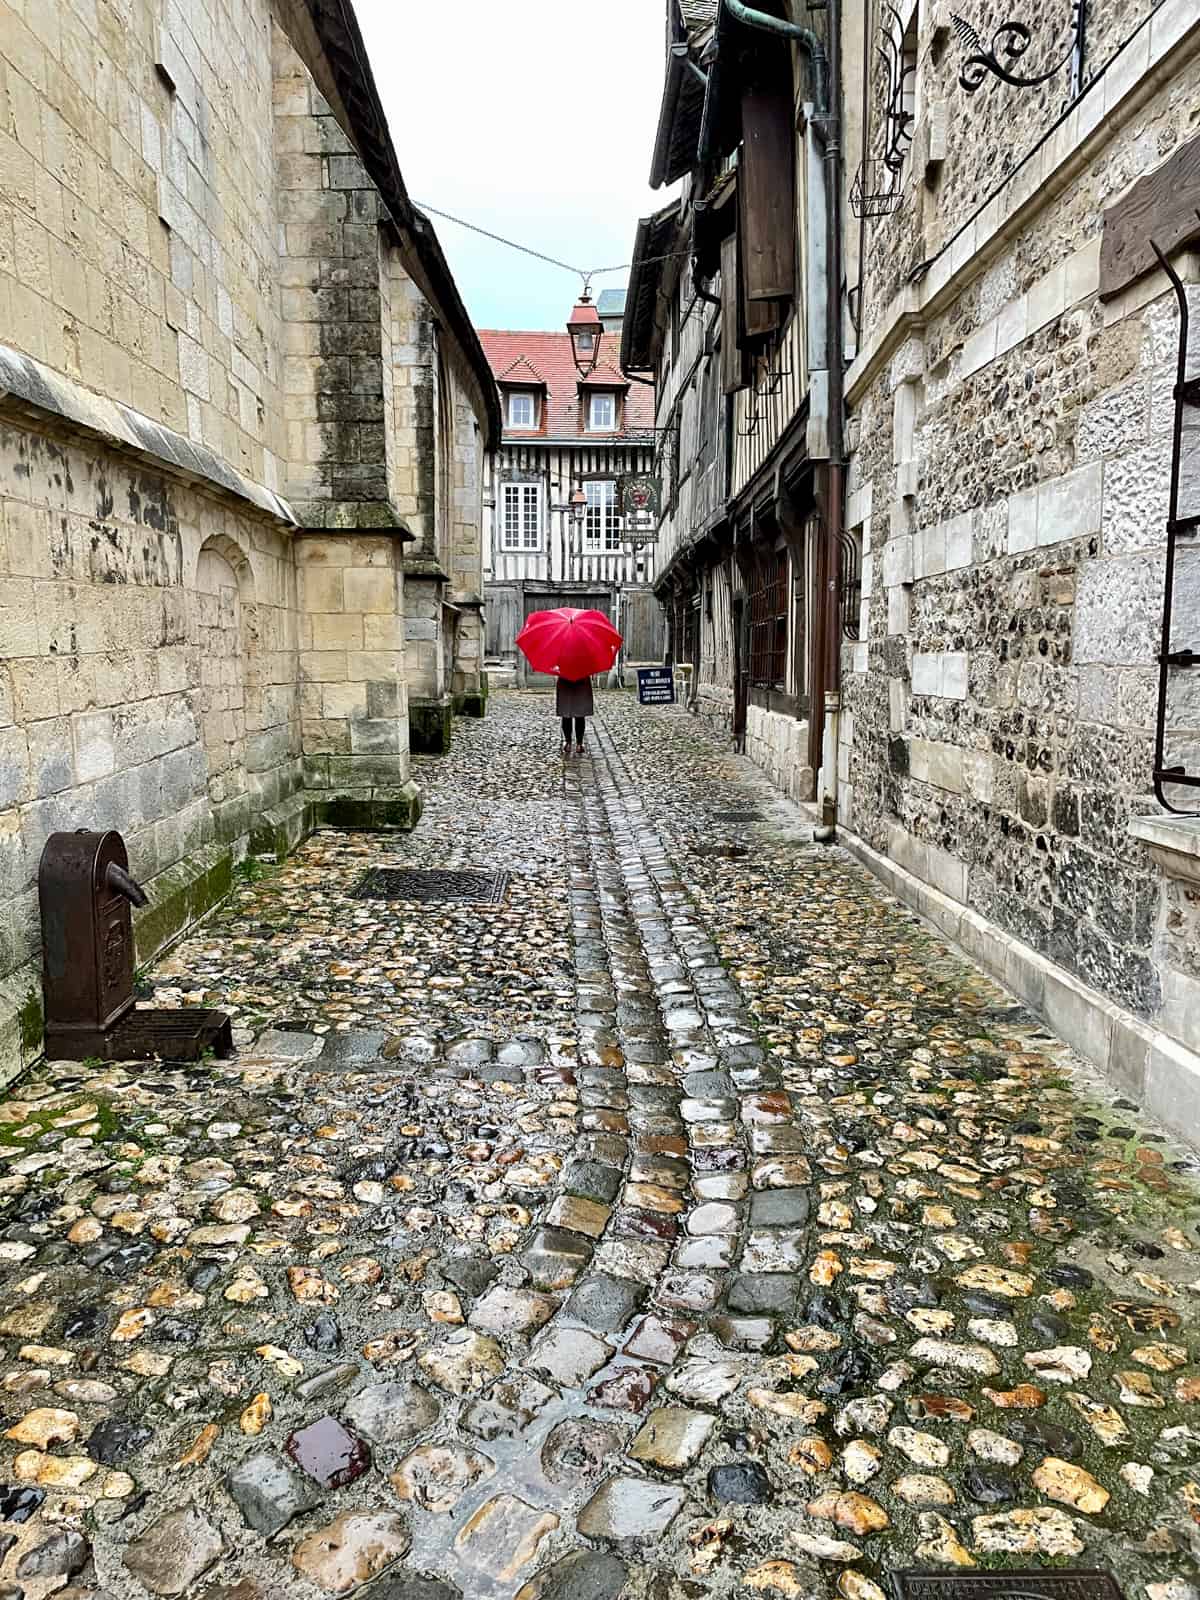 Narrow street with person with red umbrella.